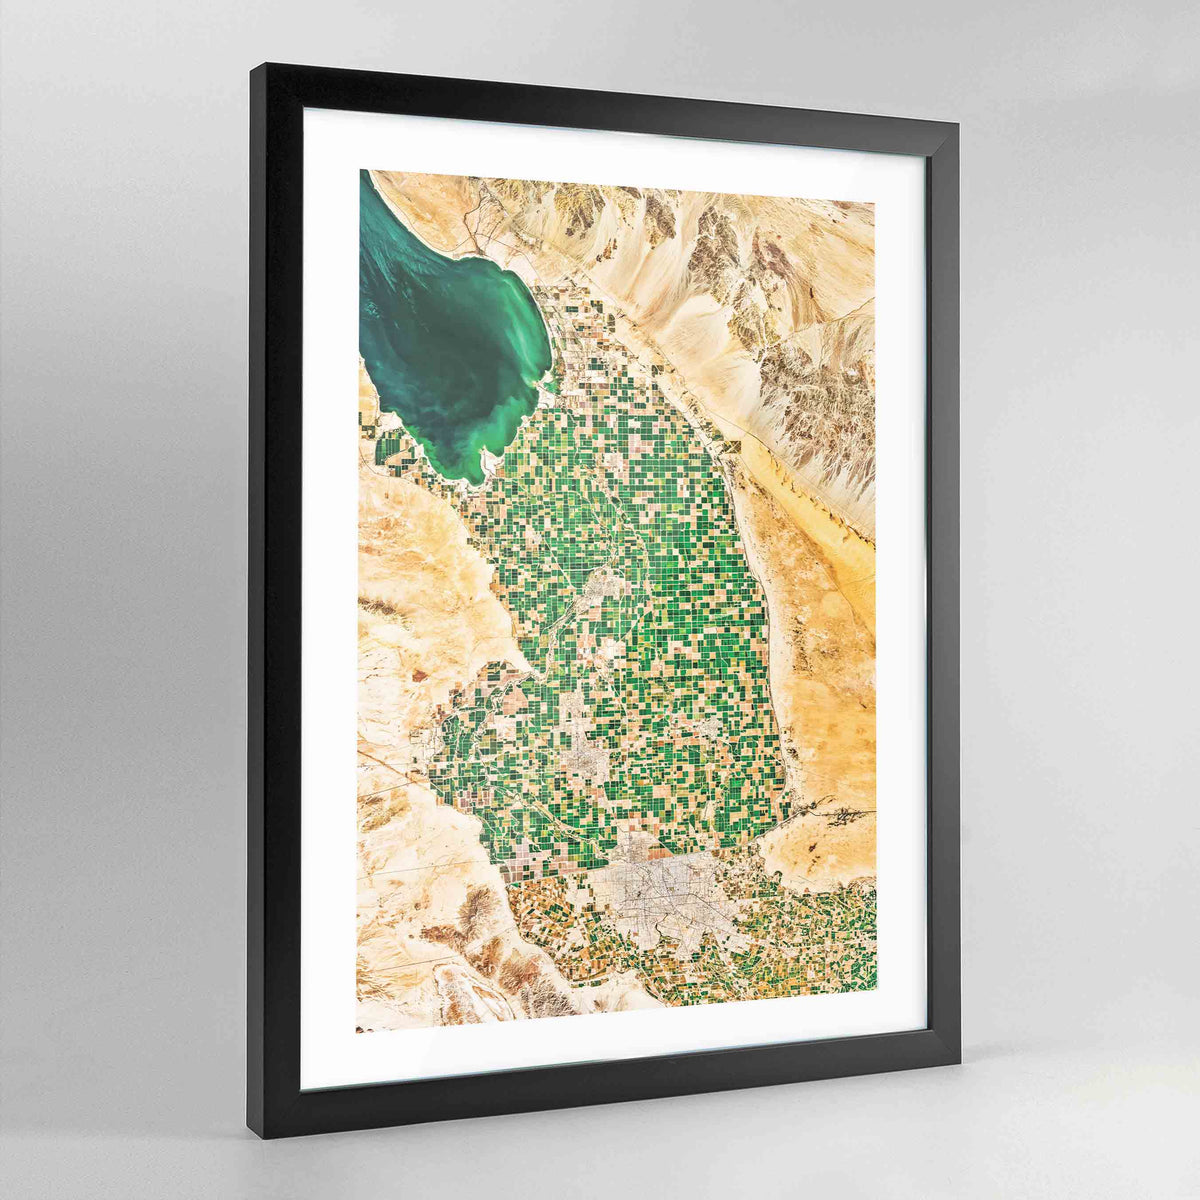 Imperial County Earth Photography Art Print - Framed